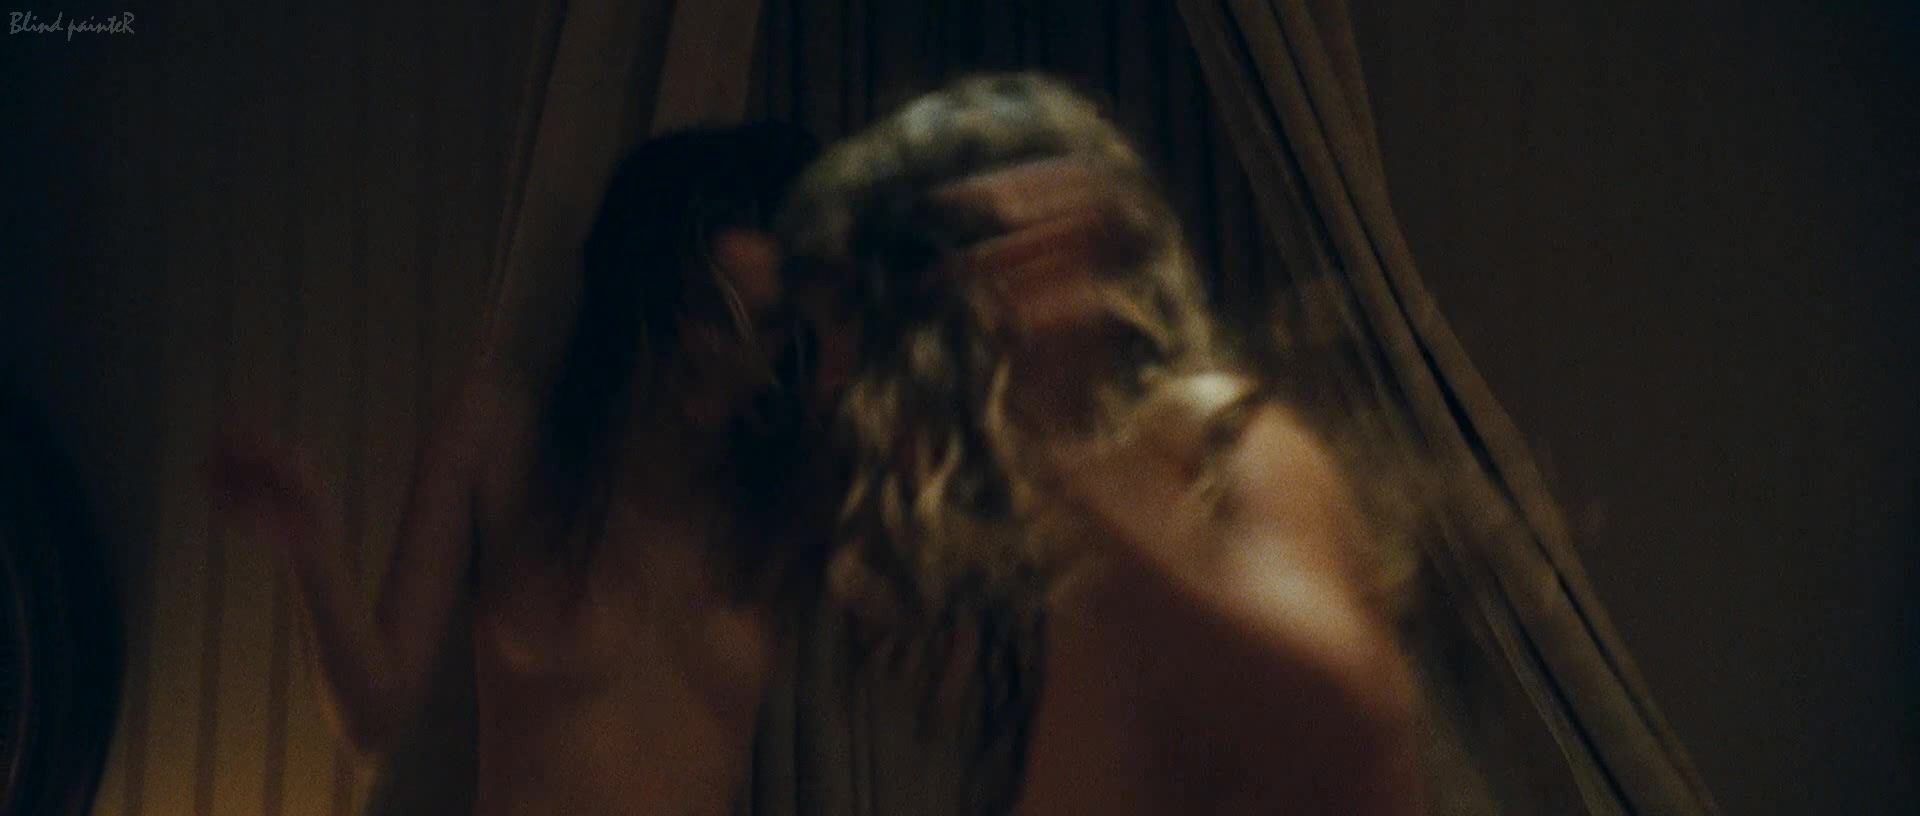 Blows Sex video Camille Rowe - Our Day Will Come (Notre Jour Viendra)  (2010) Trio - 1